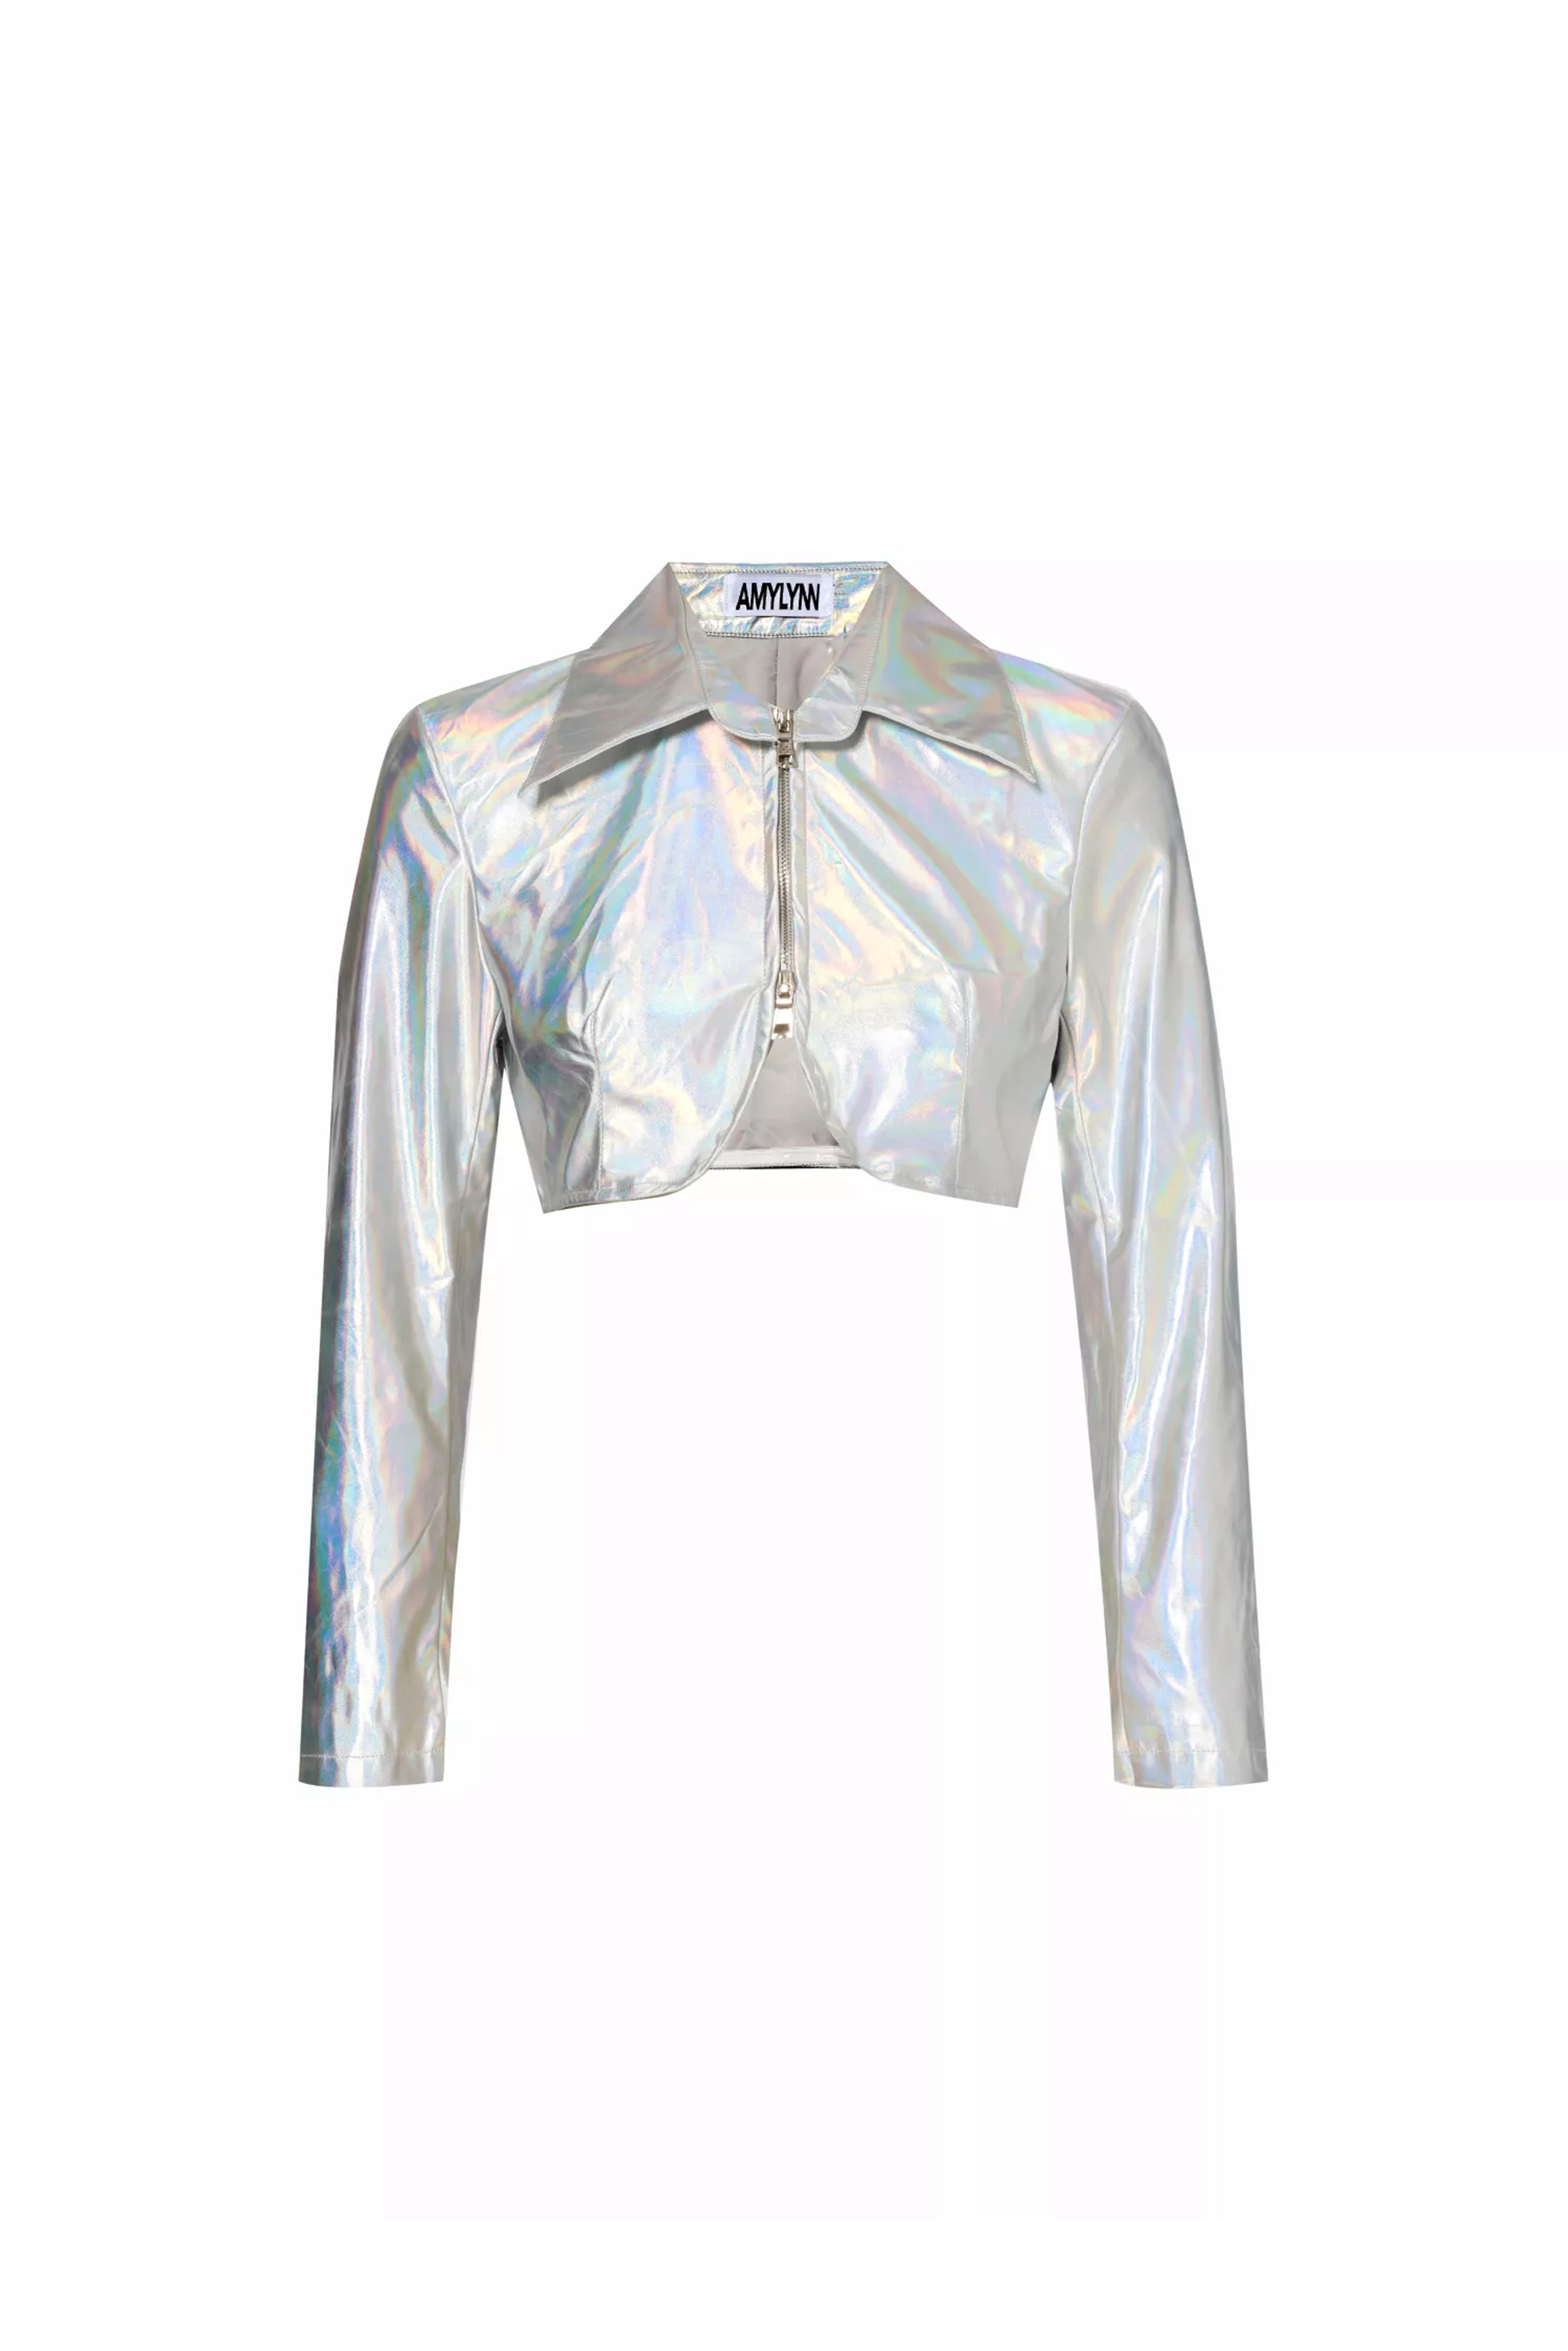 Space Holographic Zip Up Crop Jacket in Vegan Leather | AMYLYNN